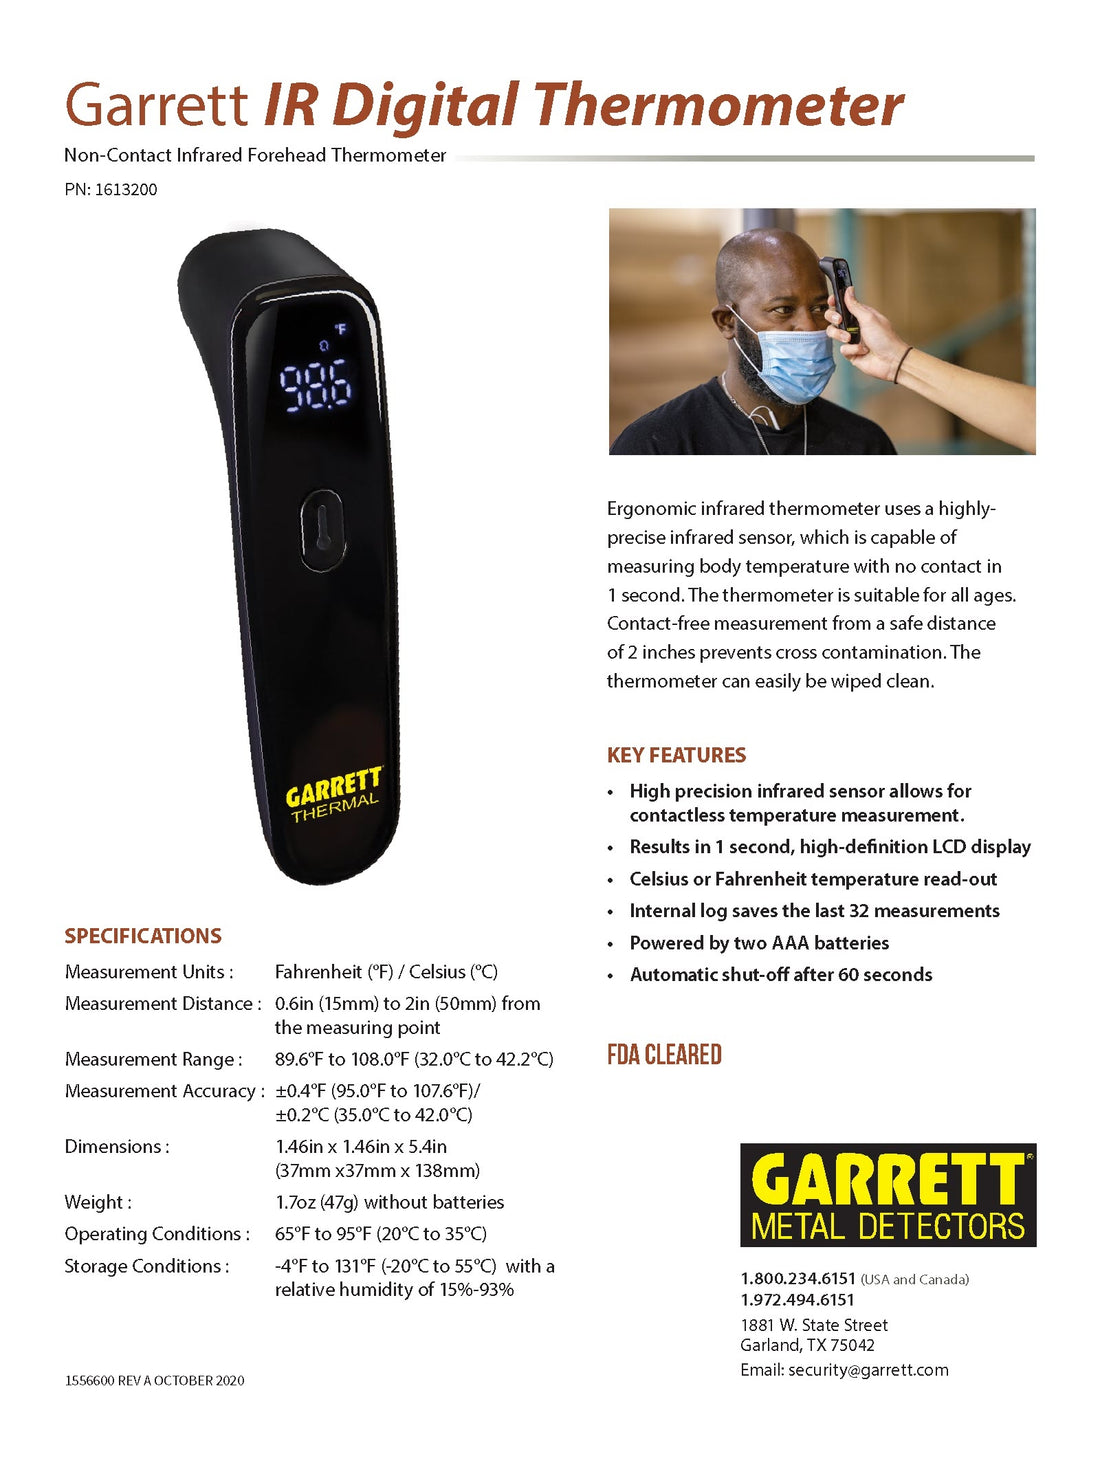 Garrett IR Digital Thermometer Non-Contact Infrared Forehead Thermometer Specifications